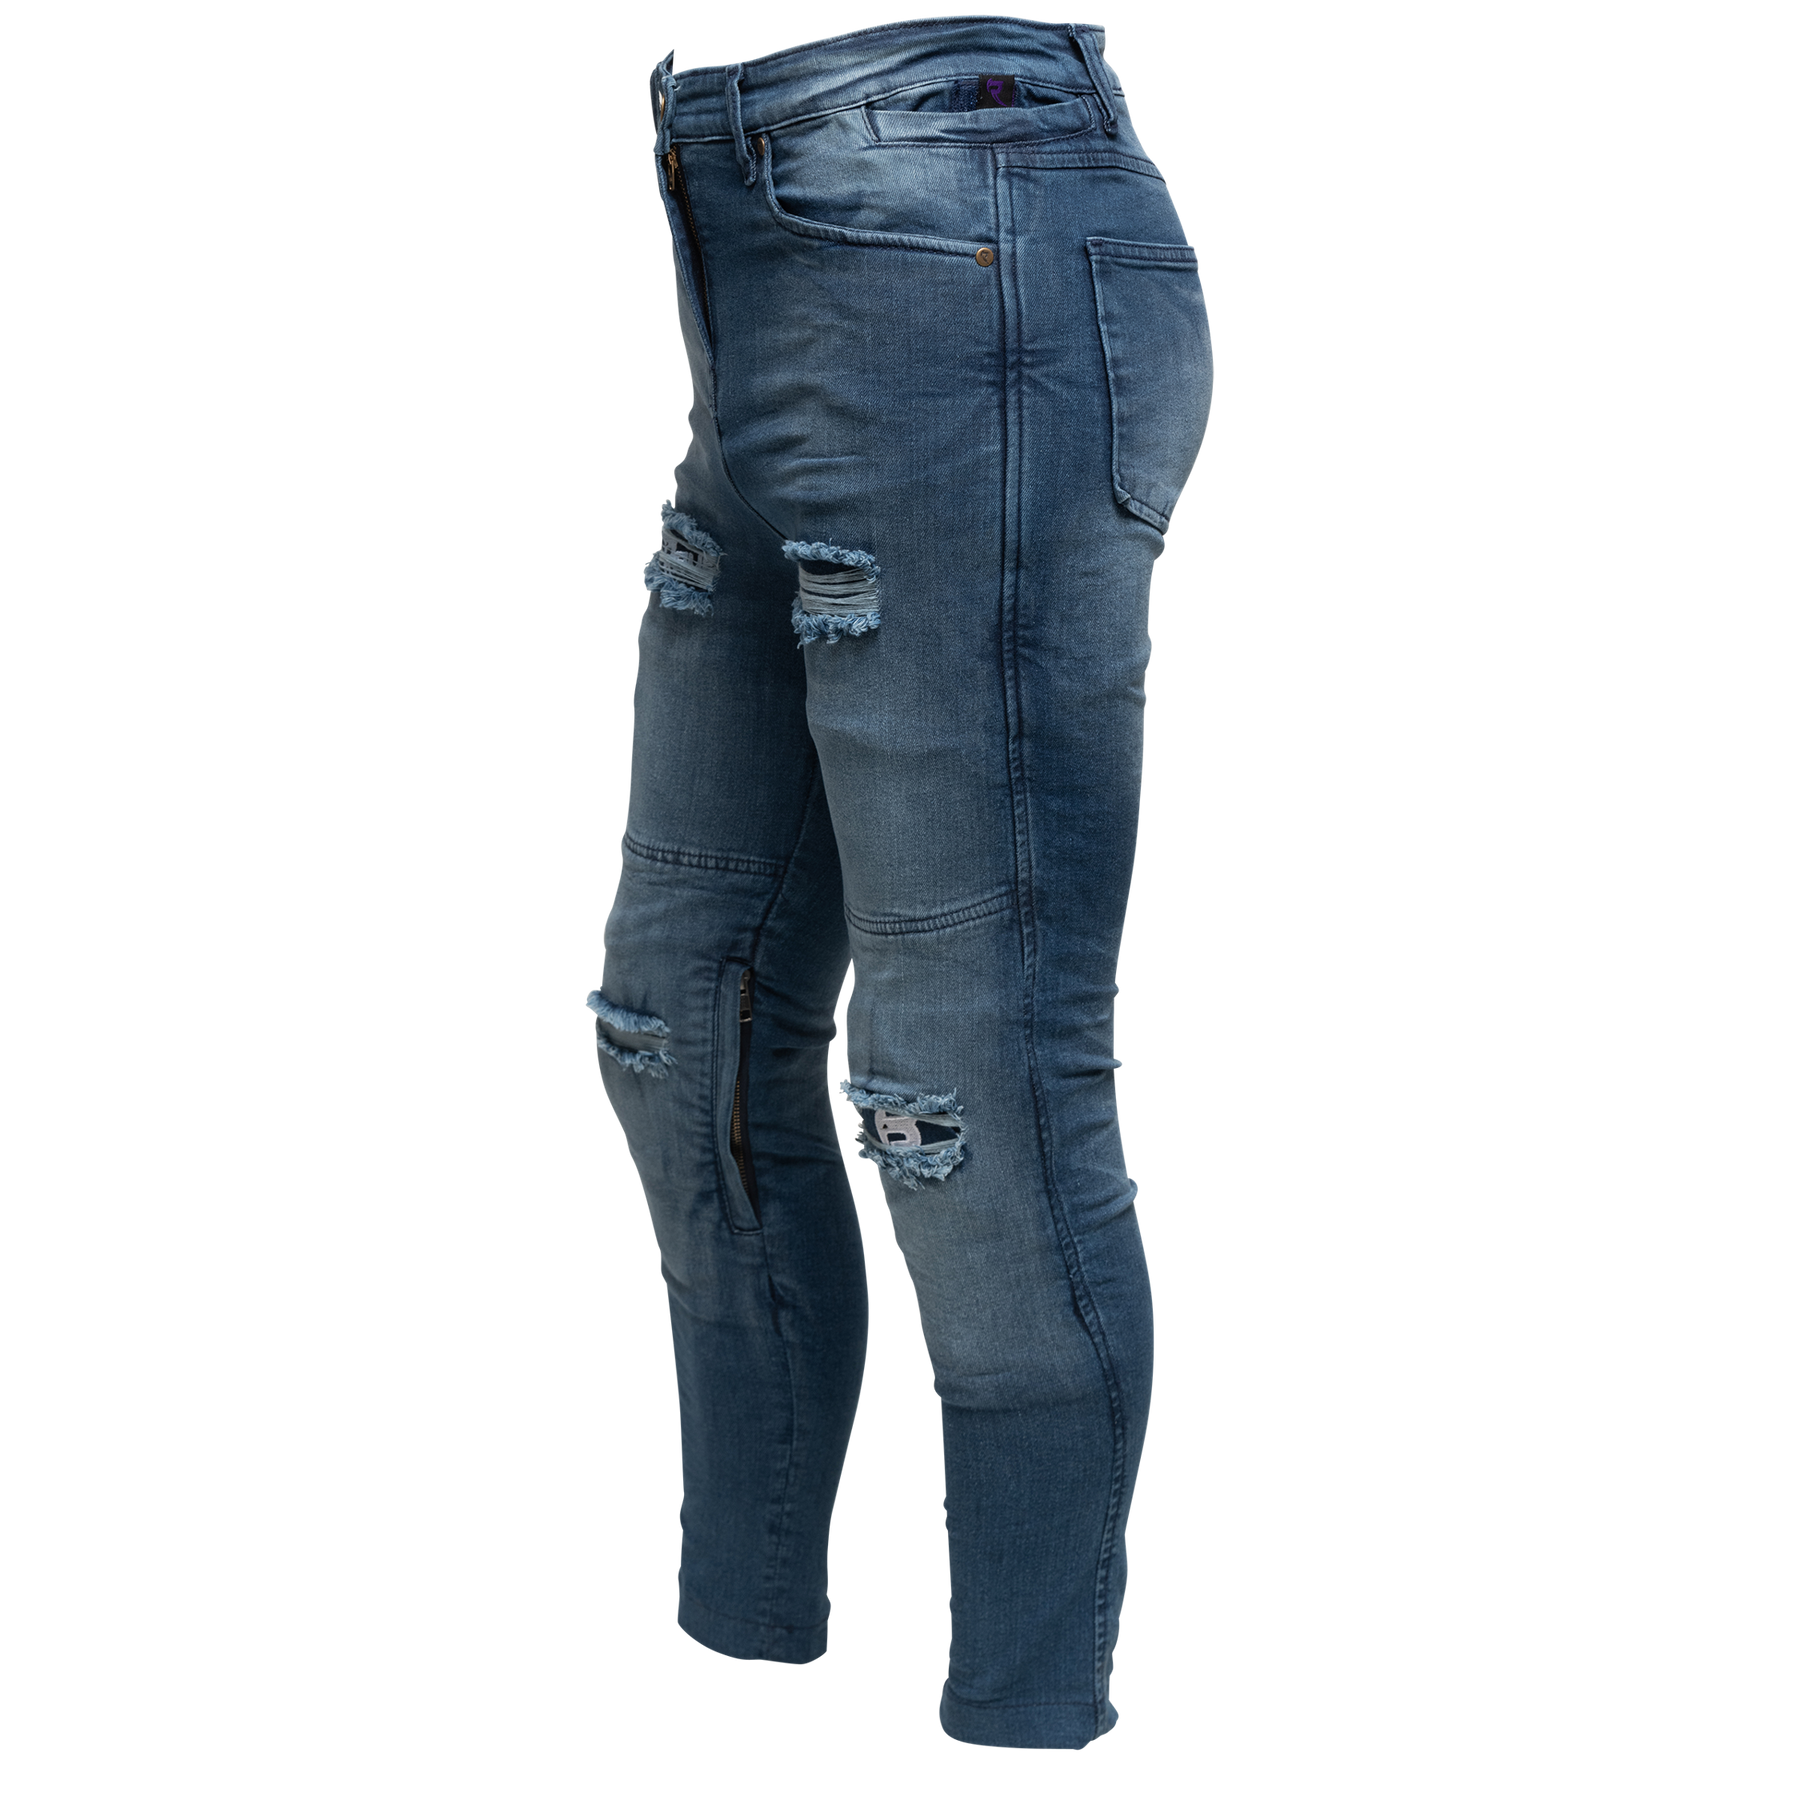 RAVEN - Motorcycle Jeans | Women's High-Waisted REVOLT Ripped Armored Jeans